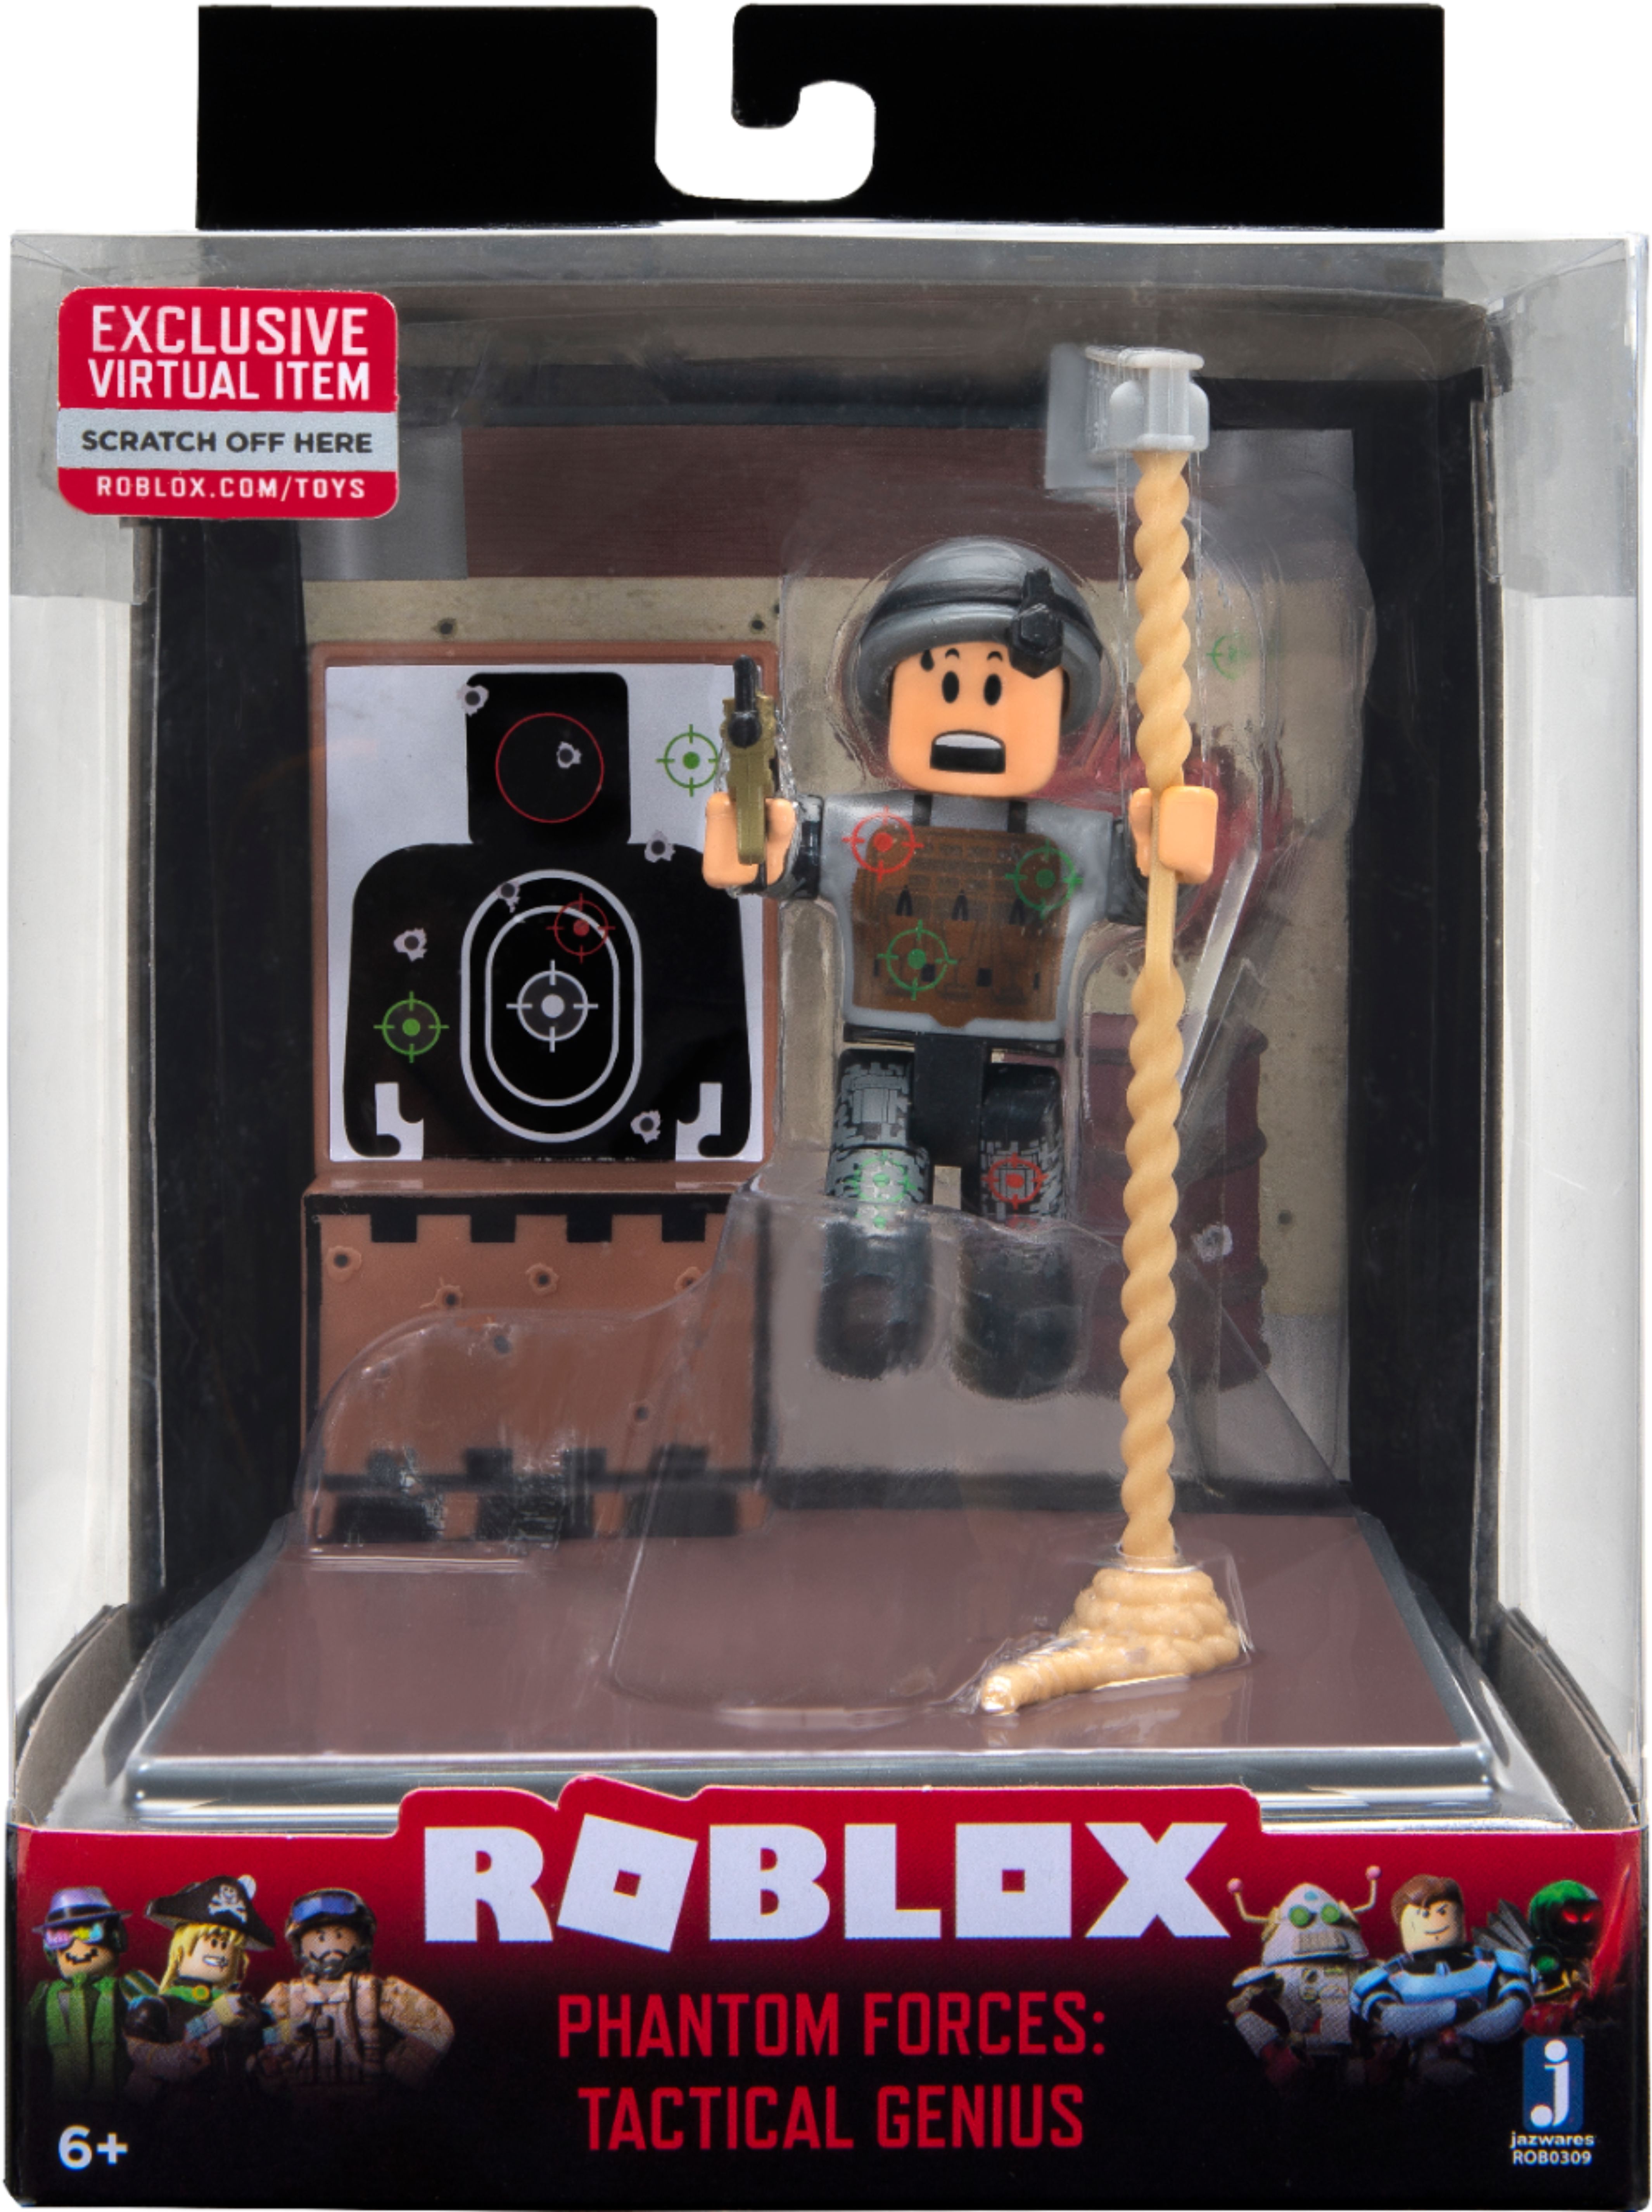 Jazwares Roblox Desktop Series Action Figure Styles May Vary Rob0253 Best Buy - roblox alex toy